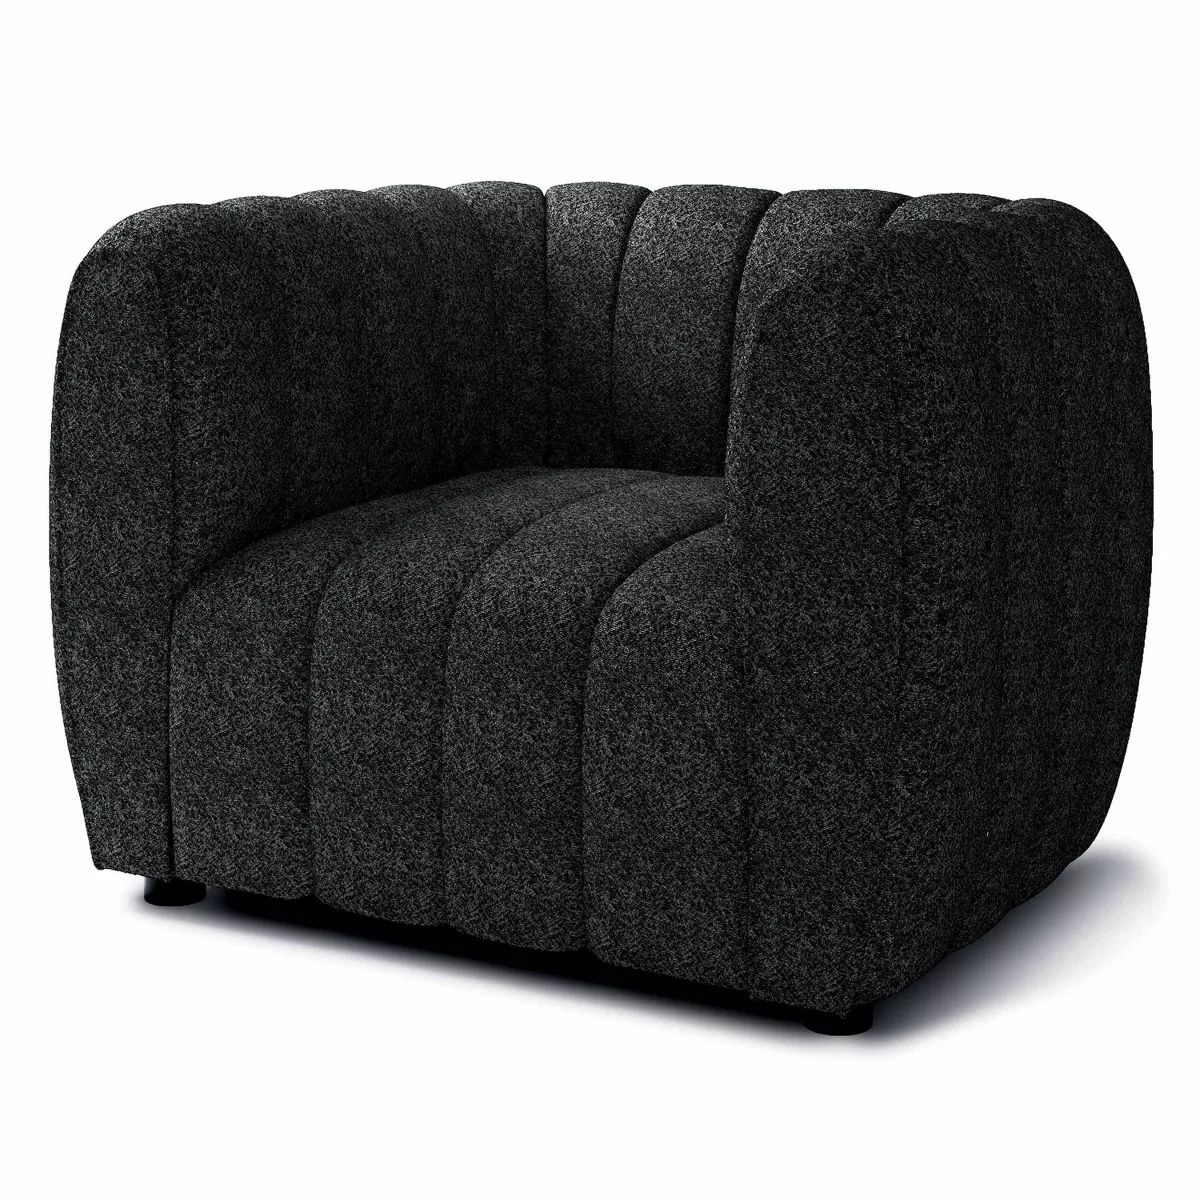 HOMES: Inside + Out Rainmist Glam Boucle Fabric Channel Tufted Accent Armchair | Target